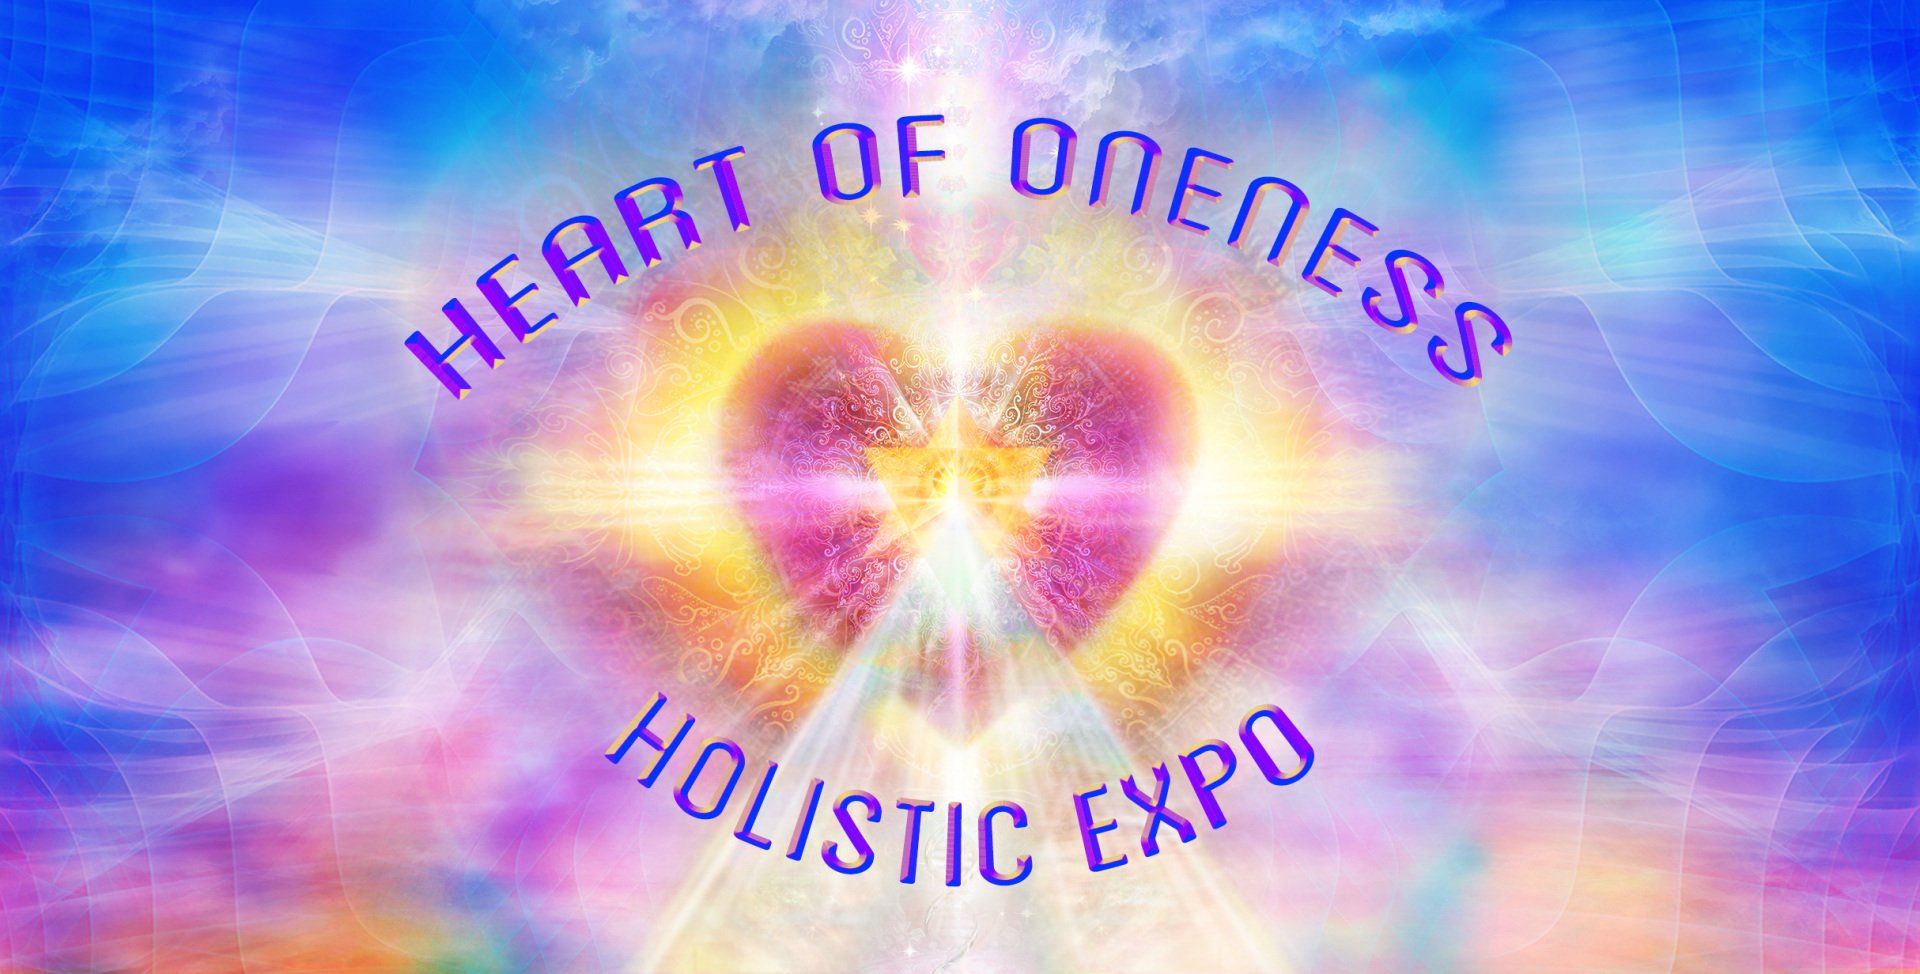 2021 Heart of Oneness Holistic Expo